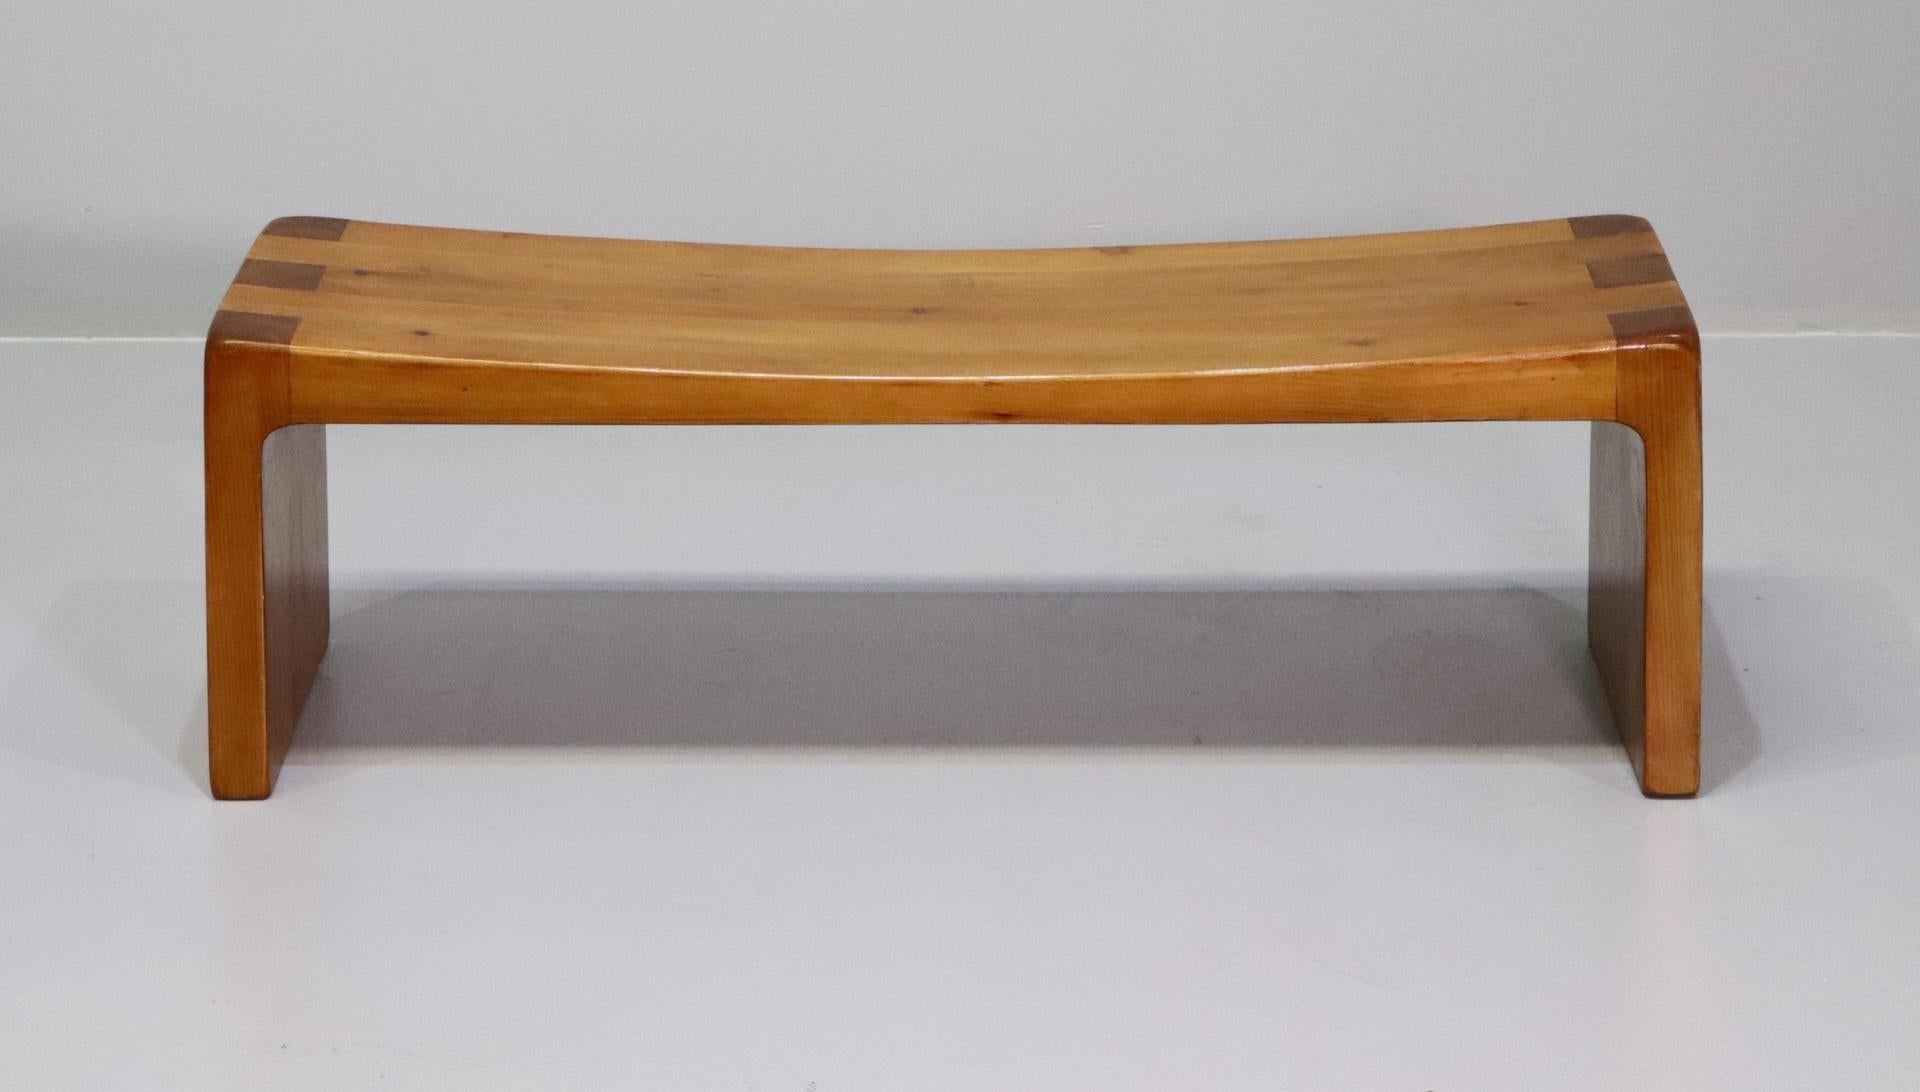 Rare Italian pancha by Giuseppe Rivadossi from the 1970s. The bench is made entirely of wood. Its construction is a perfect interlocking of noble wood inserts. Great mastery in woodworking.